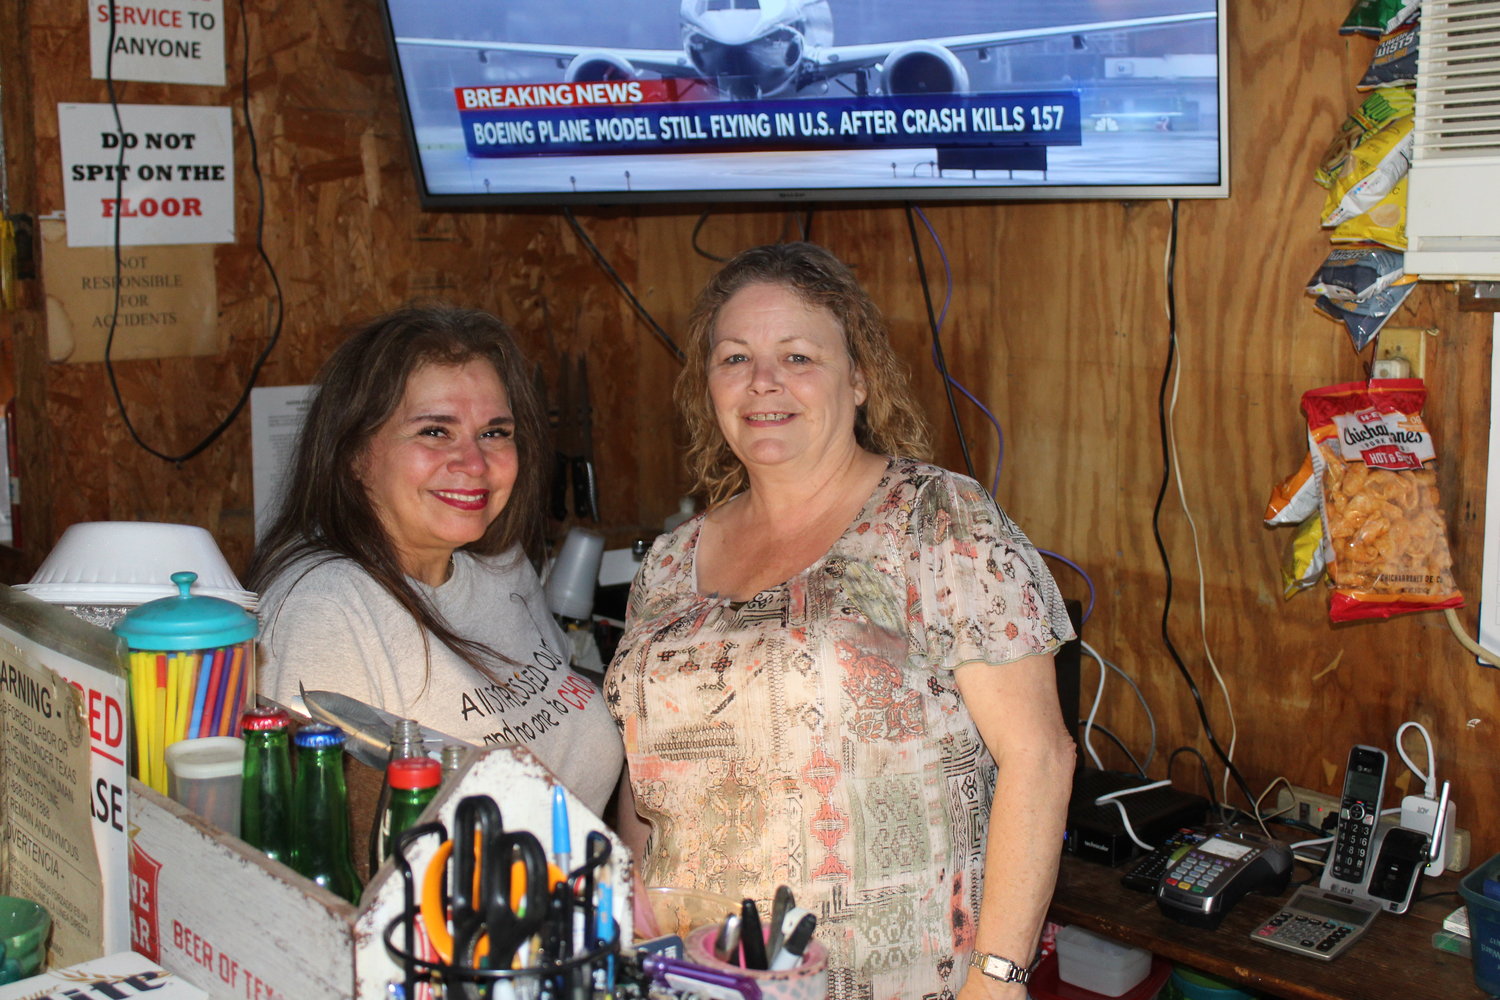 Rosie Brown of Gonzales has purchased Boomers Sports Bar and changed the name to Spanky’s, the nickname of her husband Keith. Pictured are Elvira Heinemeyer and Rosie Brown.